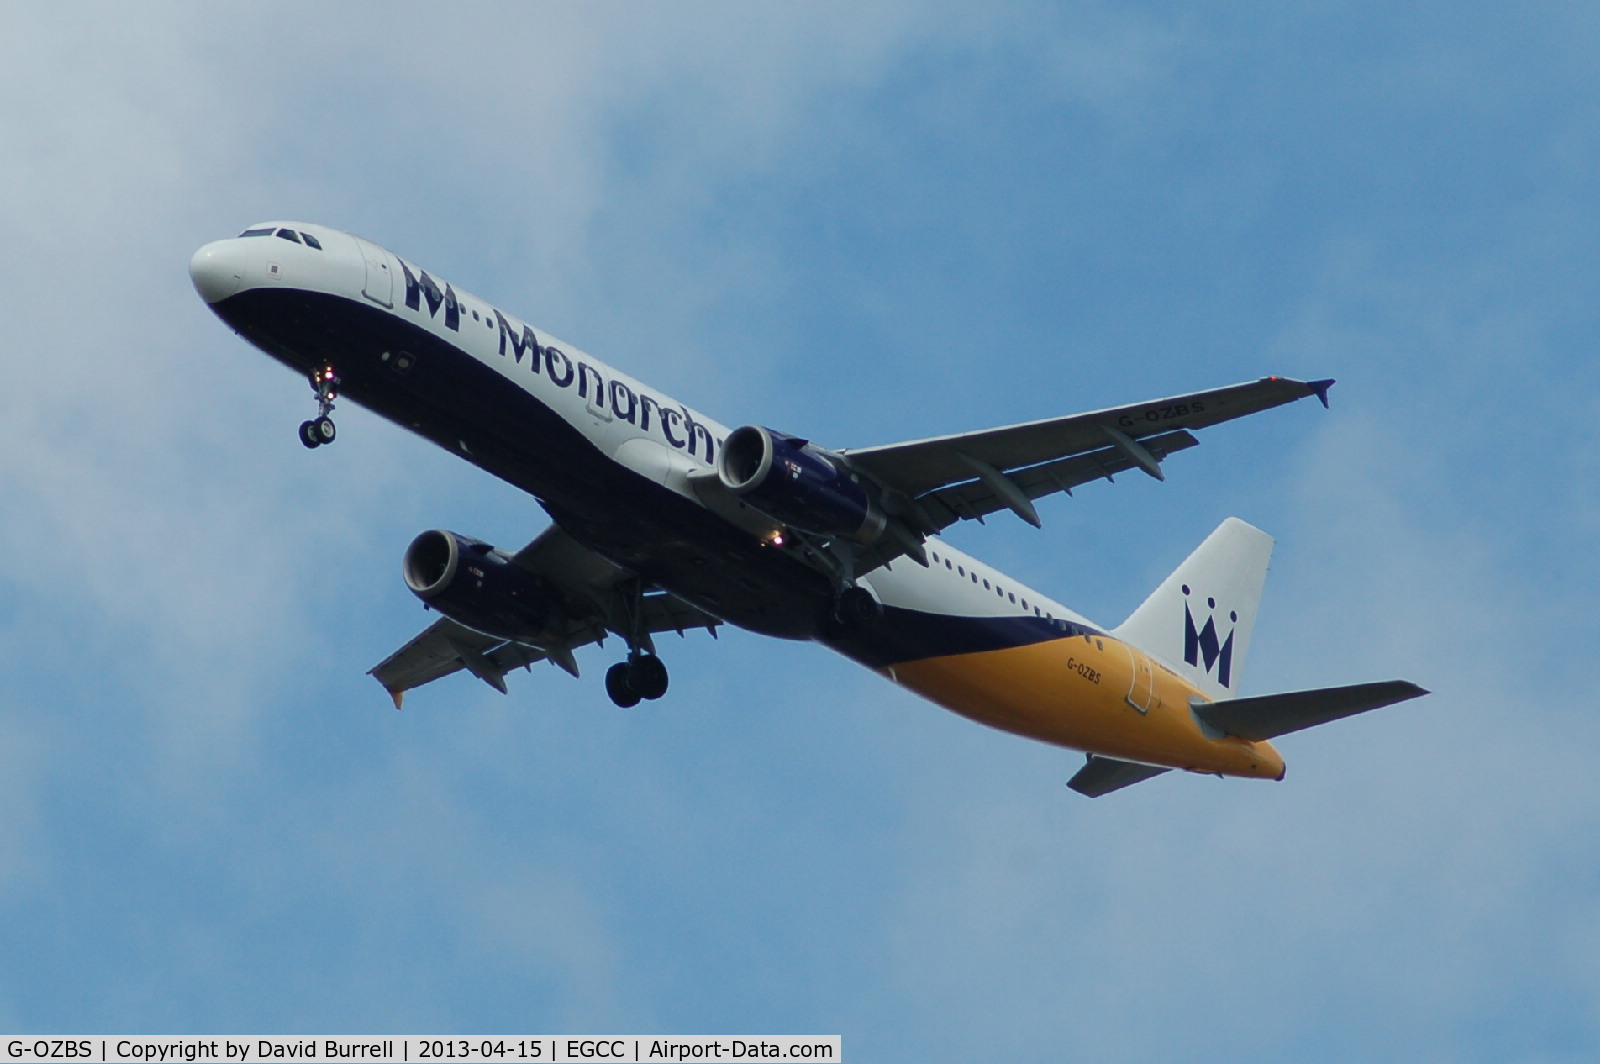 G-OZBS, 2001 Airbus A321-231 C/N 1428, Monarch Airbus A321-231 on approach to Manchester Airport.